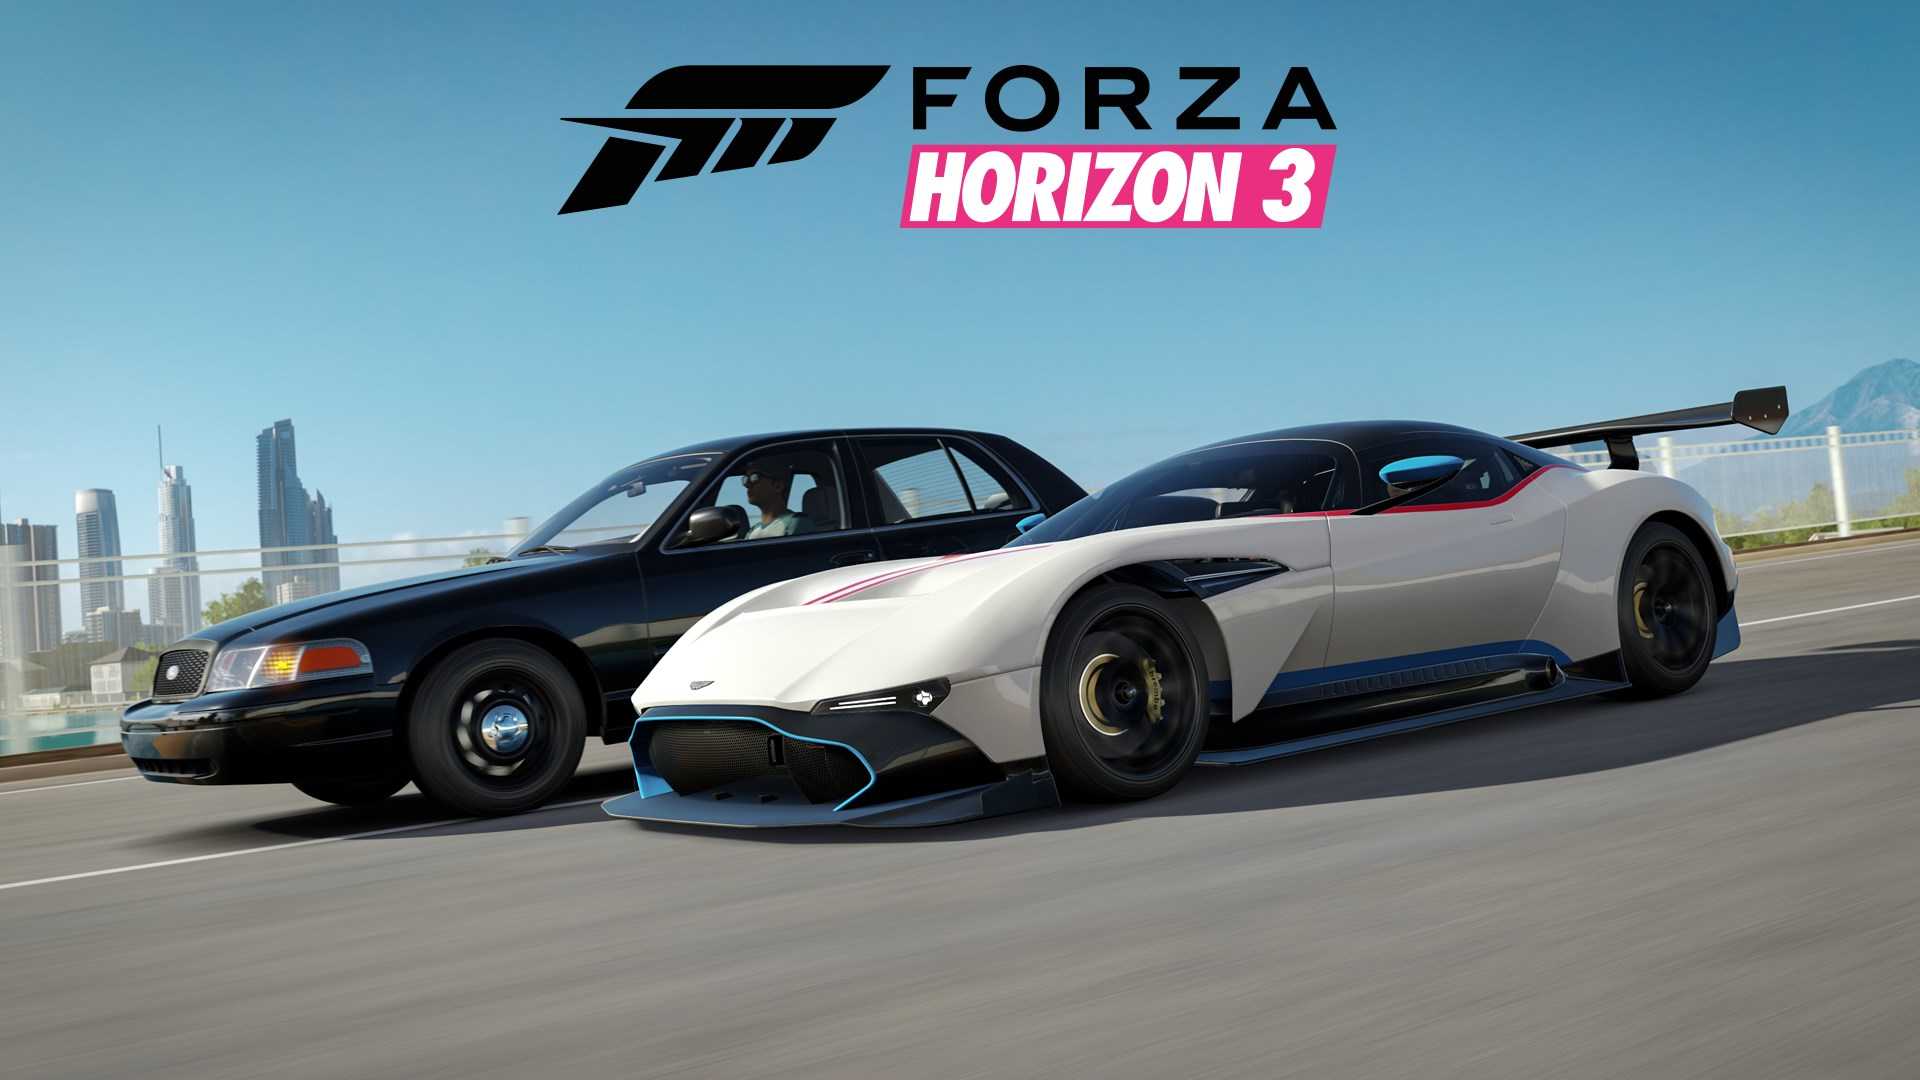 FORZA COLLECTION (3-4-6-7 parts) AutoActivation[GLOBAL]